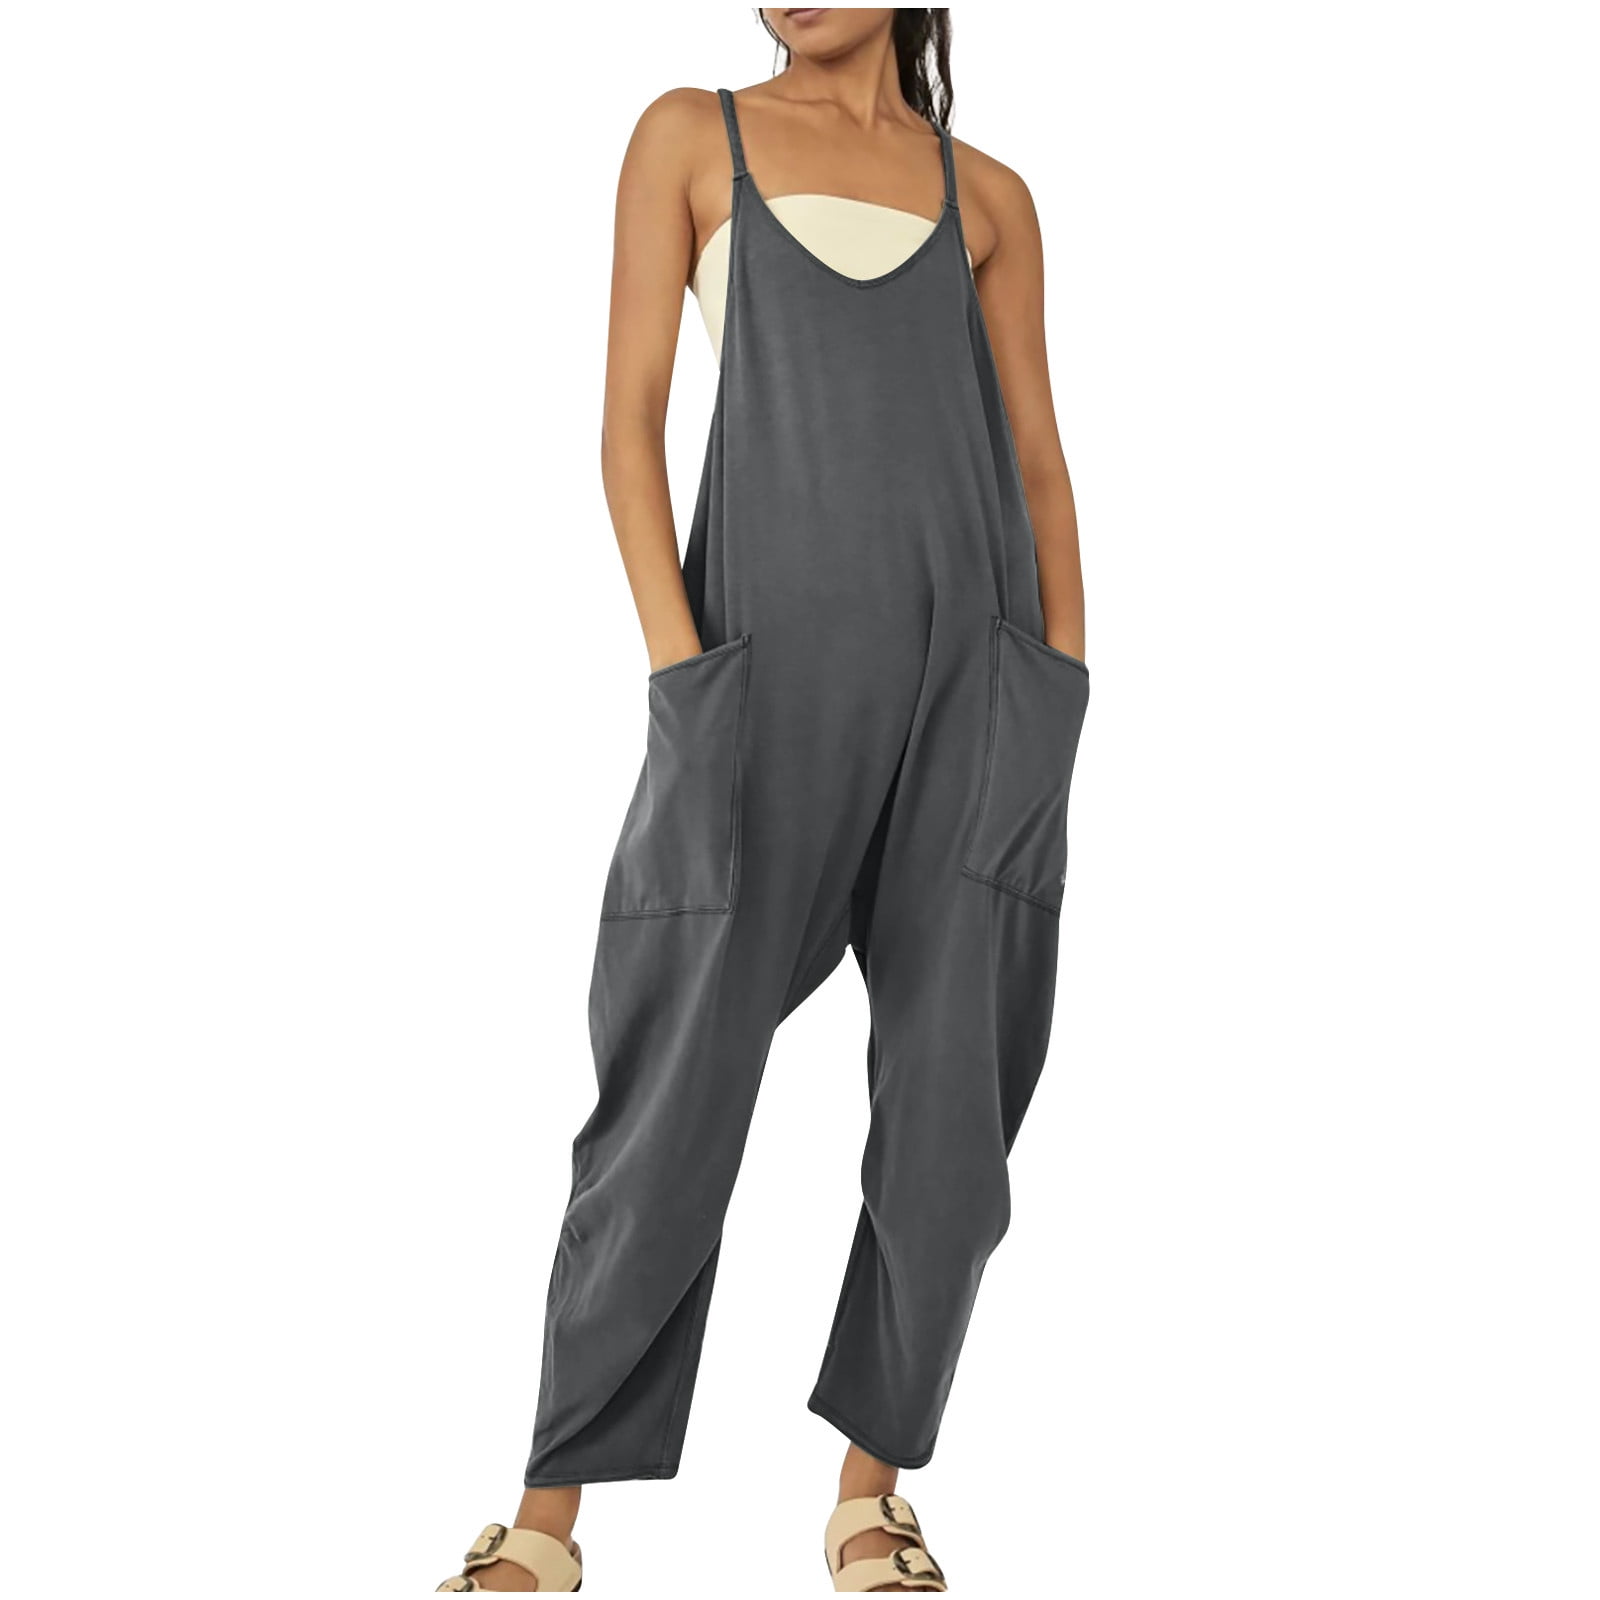 ZVAVZ Cotton Overalls, Petite Jumpsuits for Women Casual